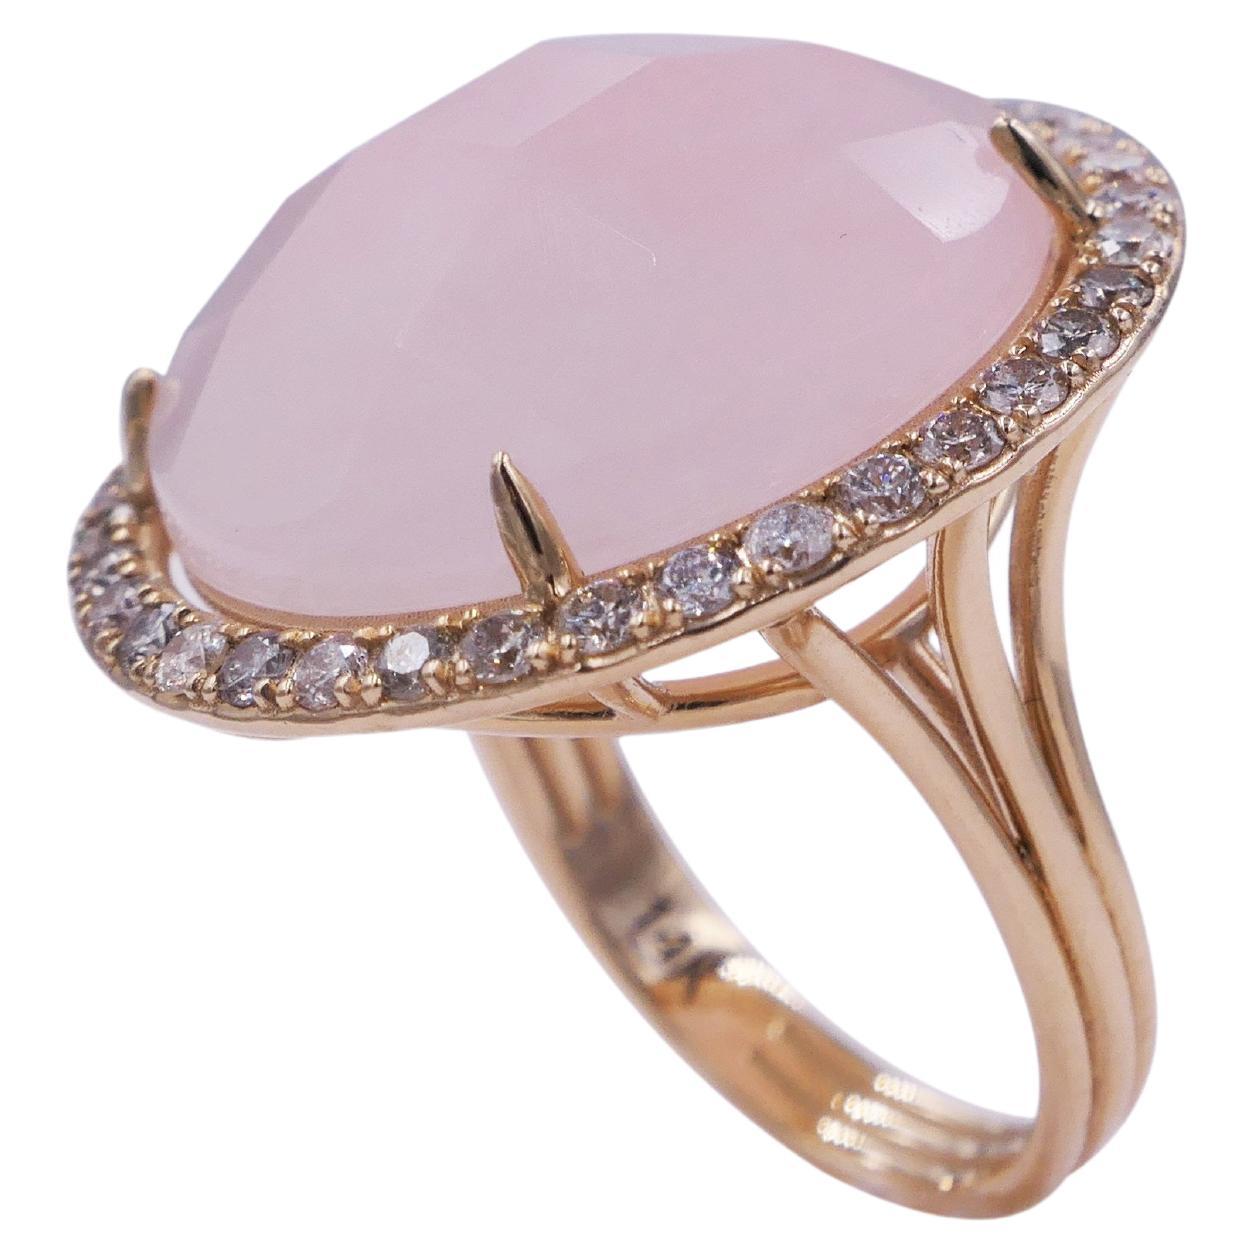 Rose Quartz Round Faceted Cabochon Diamond Halo Pave 14 Karat Yellow Gold Ring
14 Karat Yellow Gold
Rose Quartz Cabochon Gemstones
0.60 cts Diamonds
Size 7, Resizable upon request 

Important Information:
Please note that this item will take 2-4